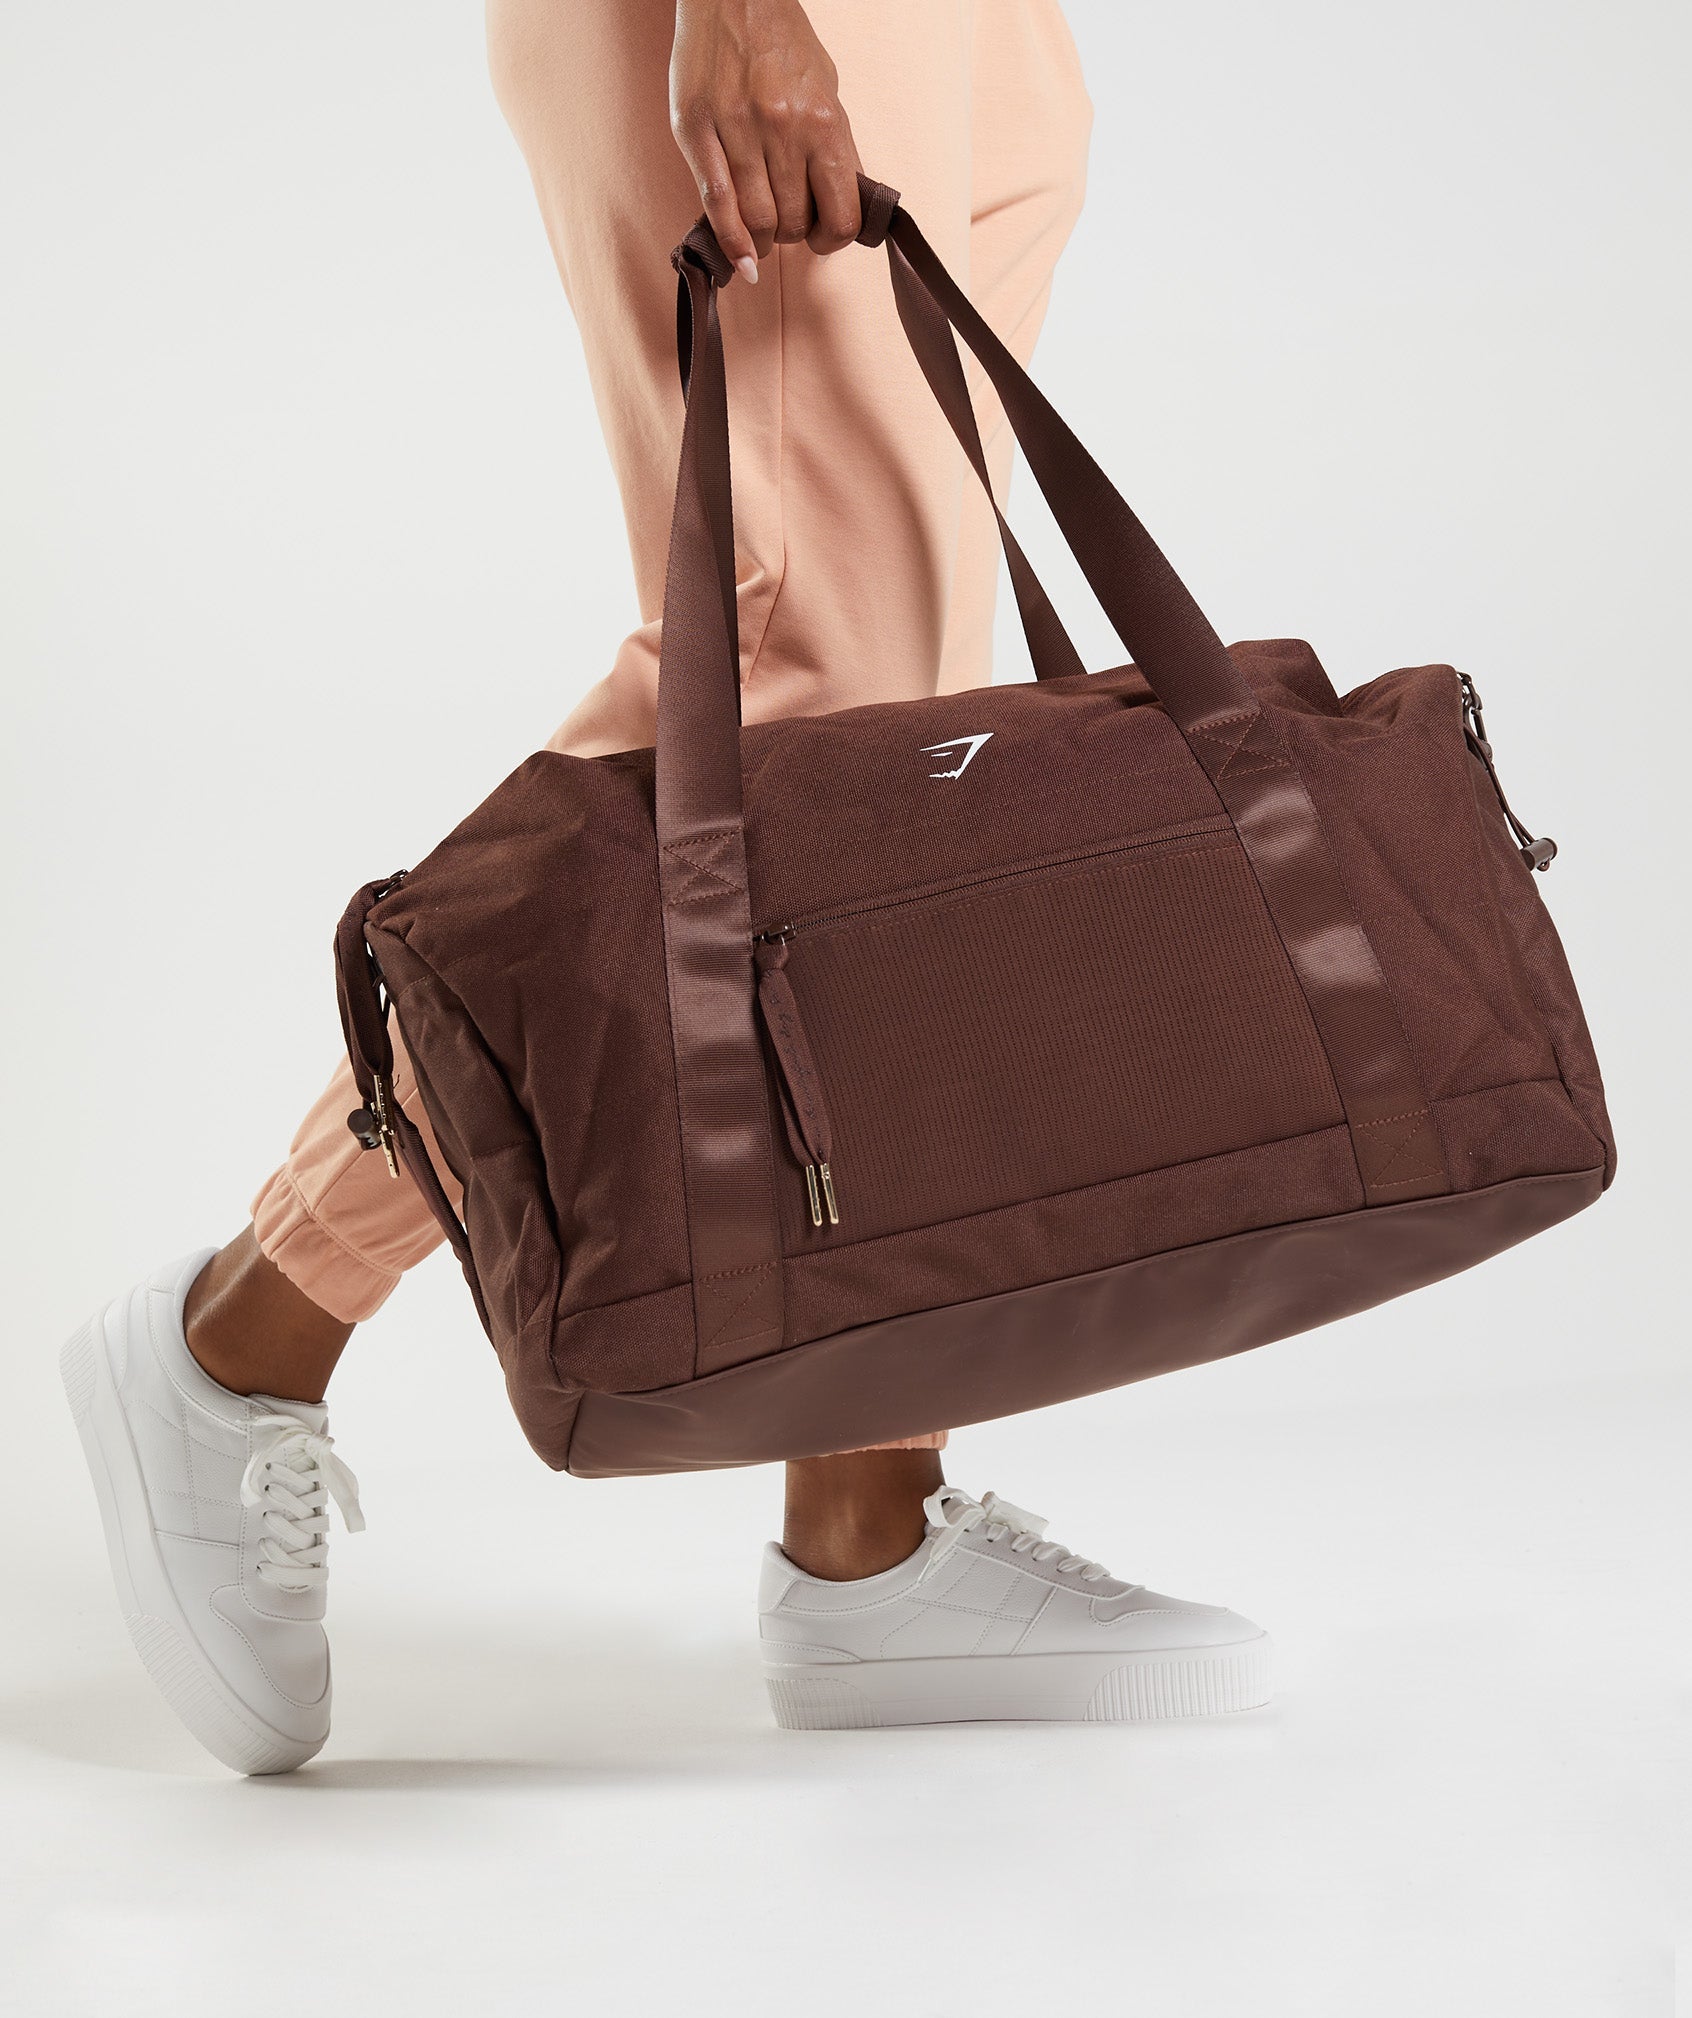 Whitney Gym Bag in Rekindle Brown - view 4